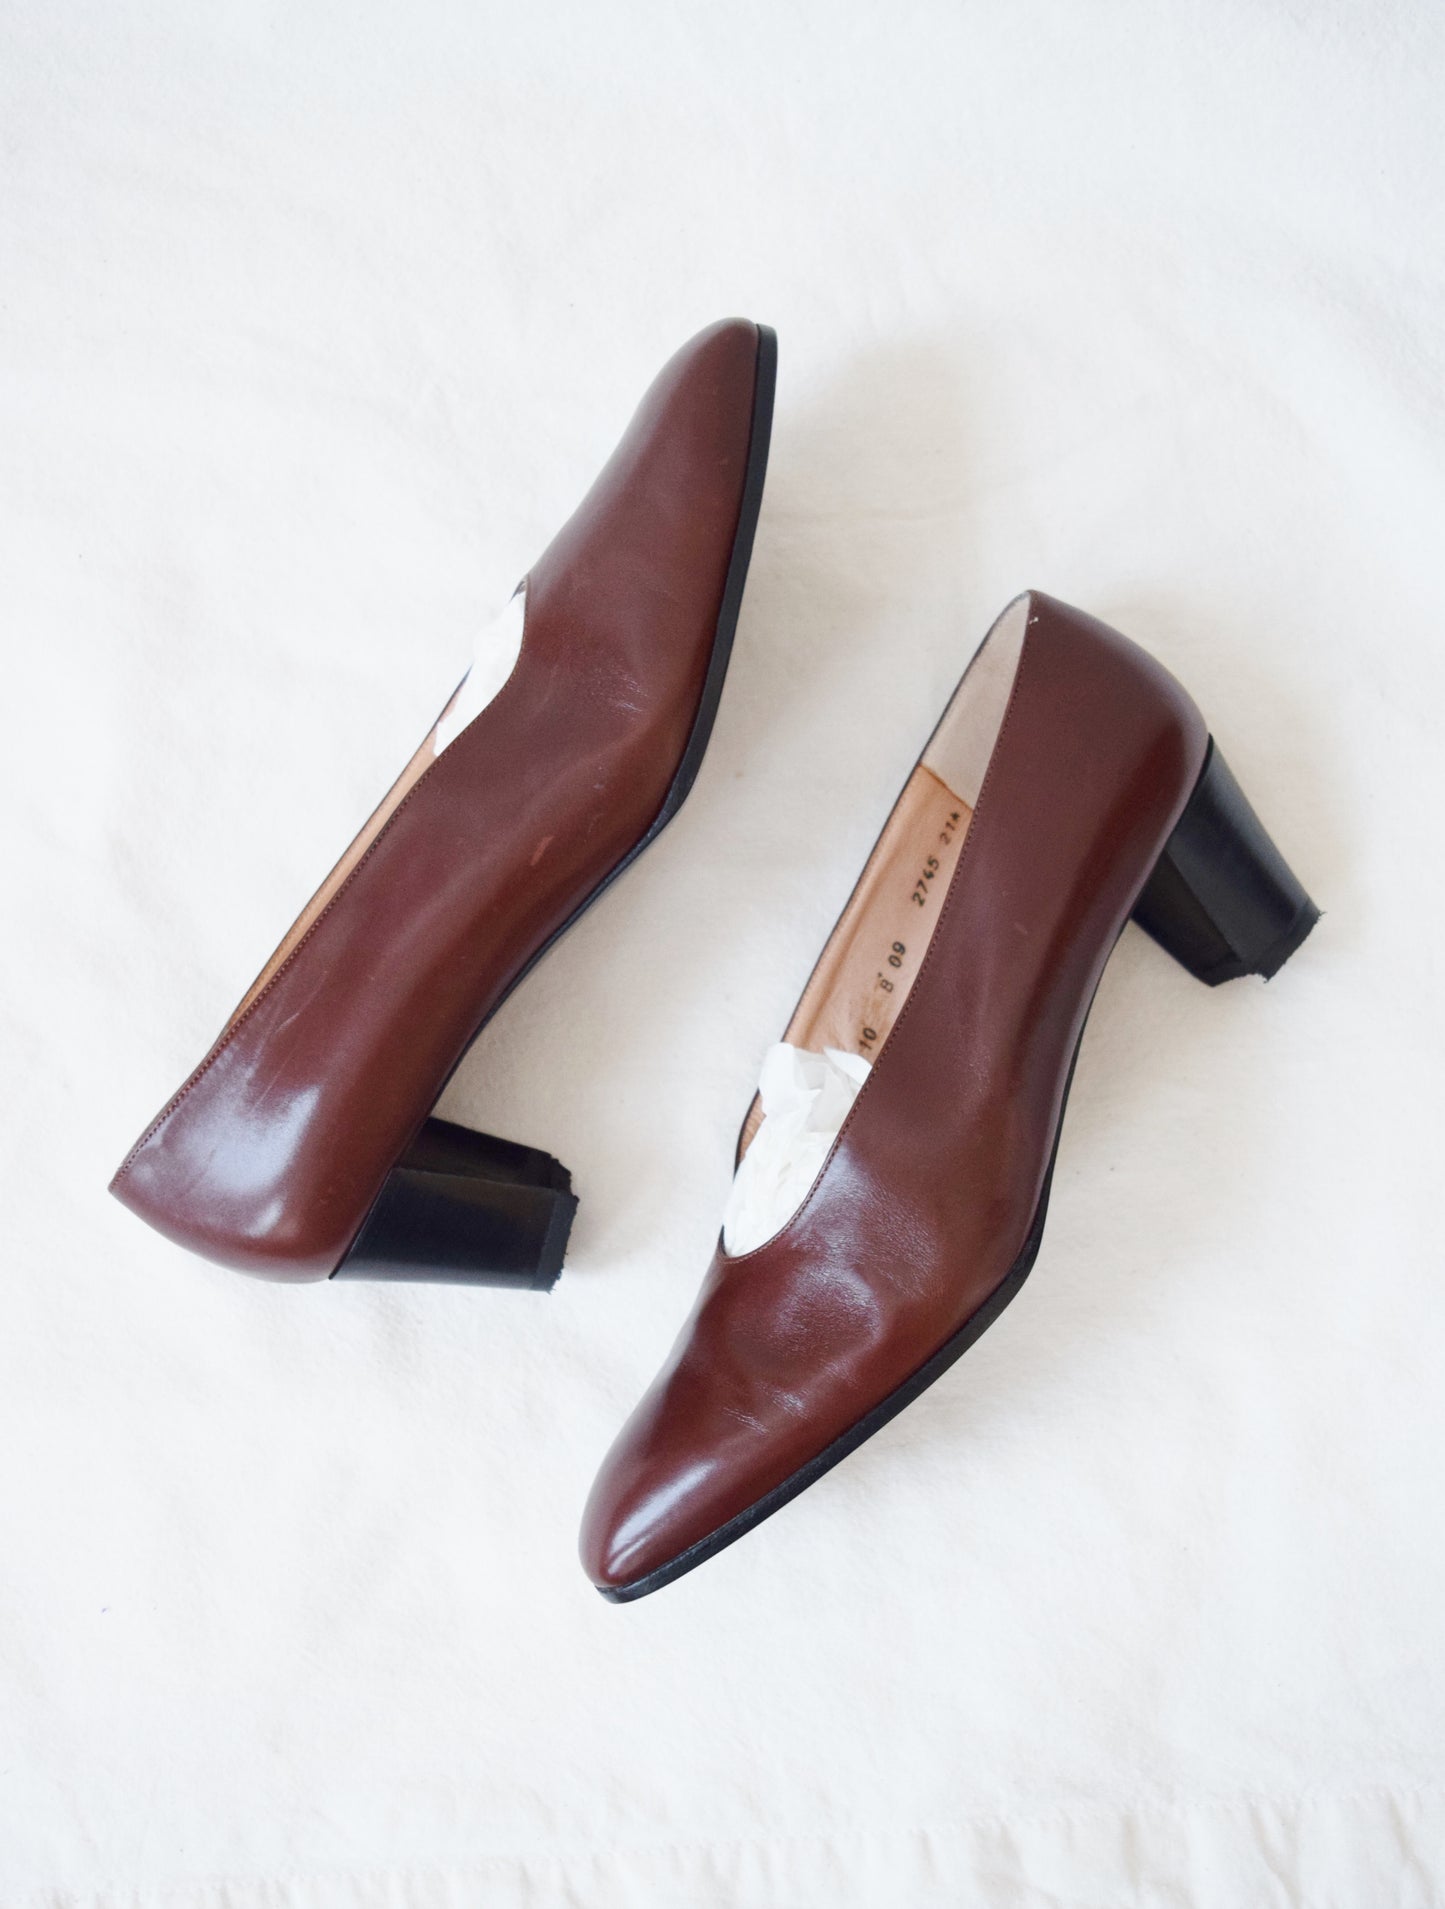 Vintage Robert Clergerie Pumps in Chestnut Leather | 1980s/90s | US 10